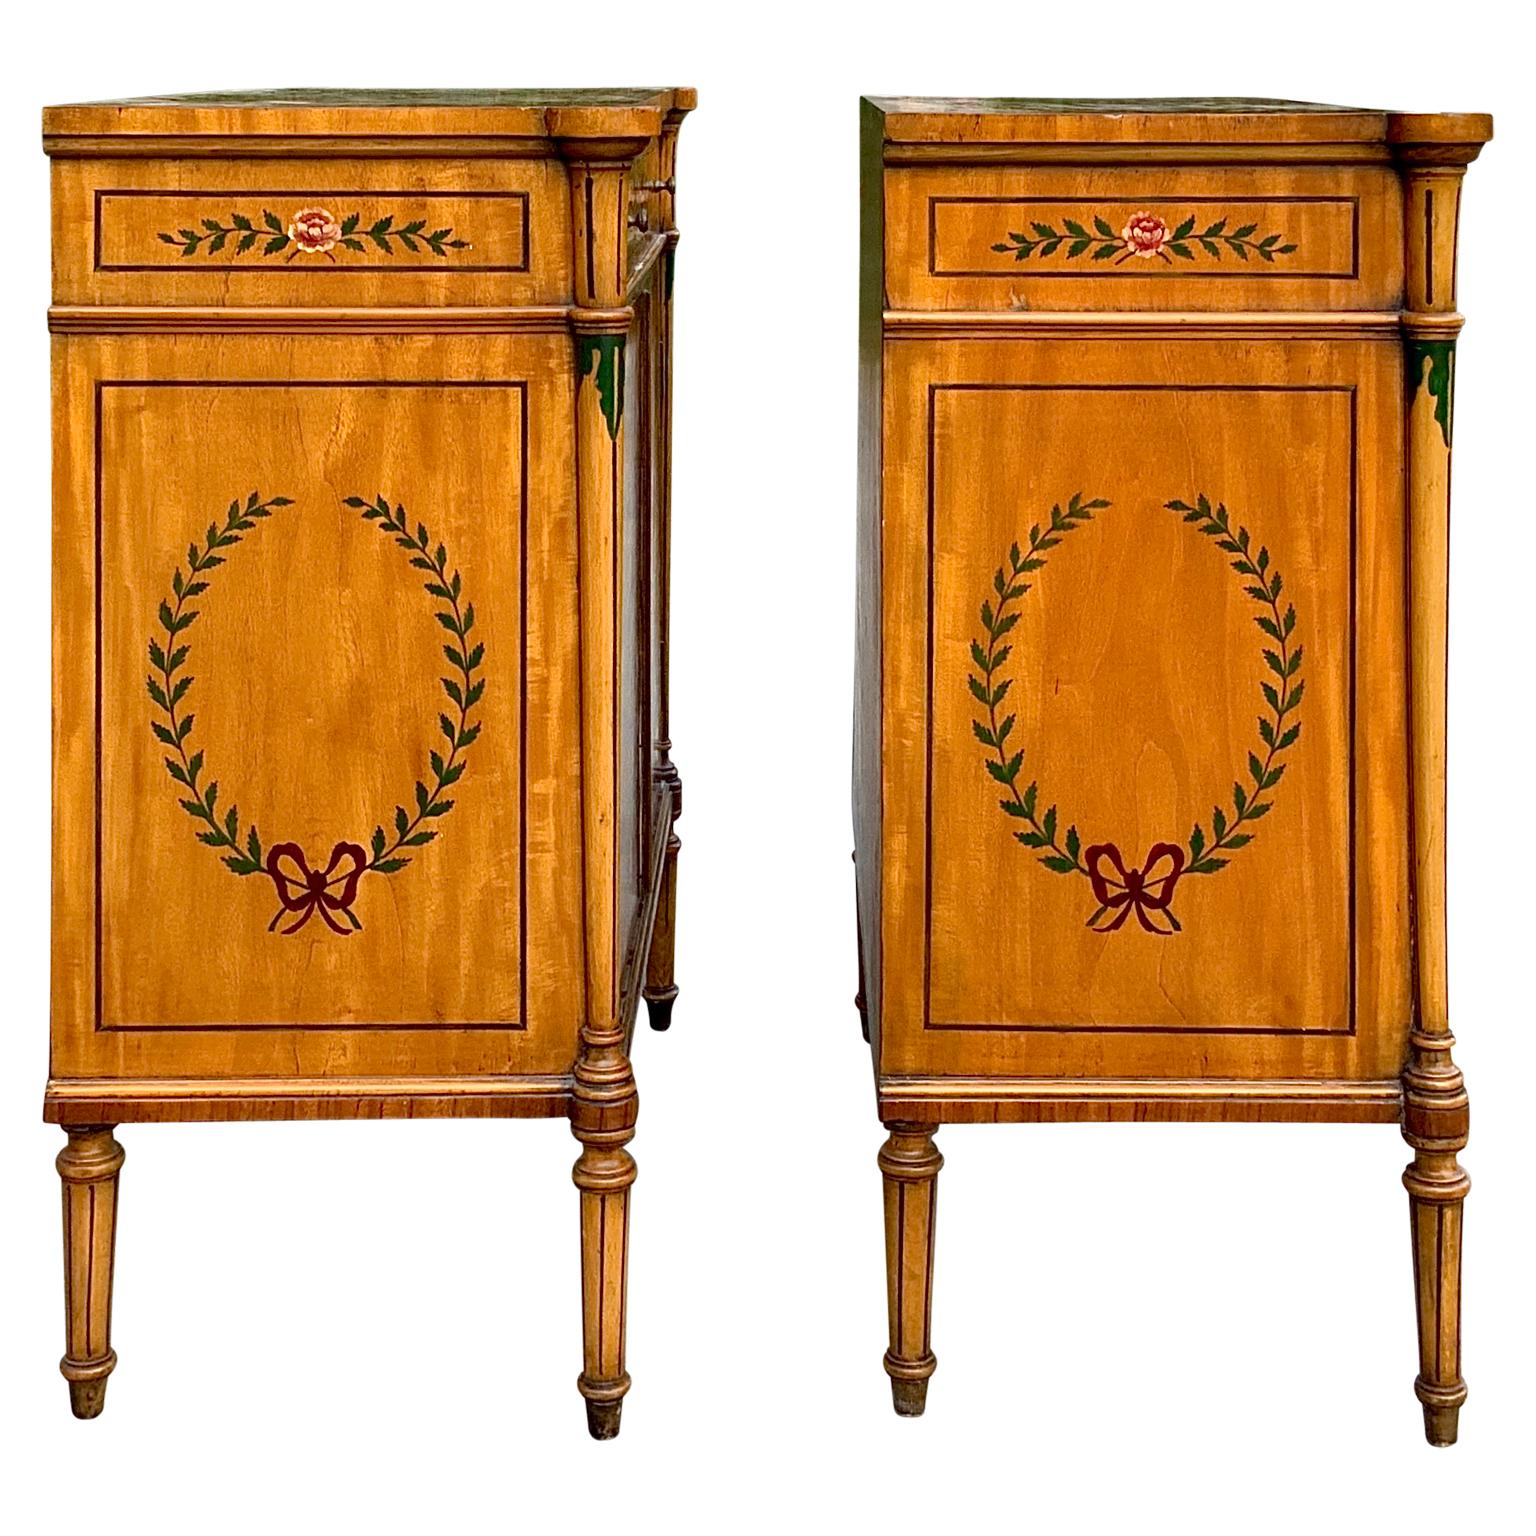 19th Century Pair of Antique Sheraton Style Hand Painted Inlaid Cabinets Nightstands